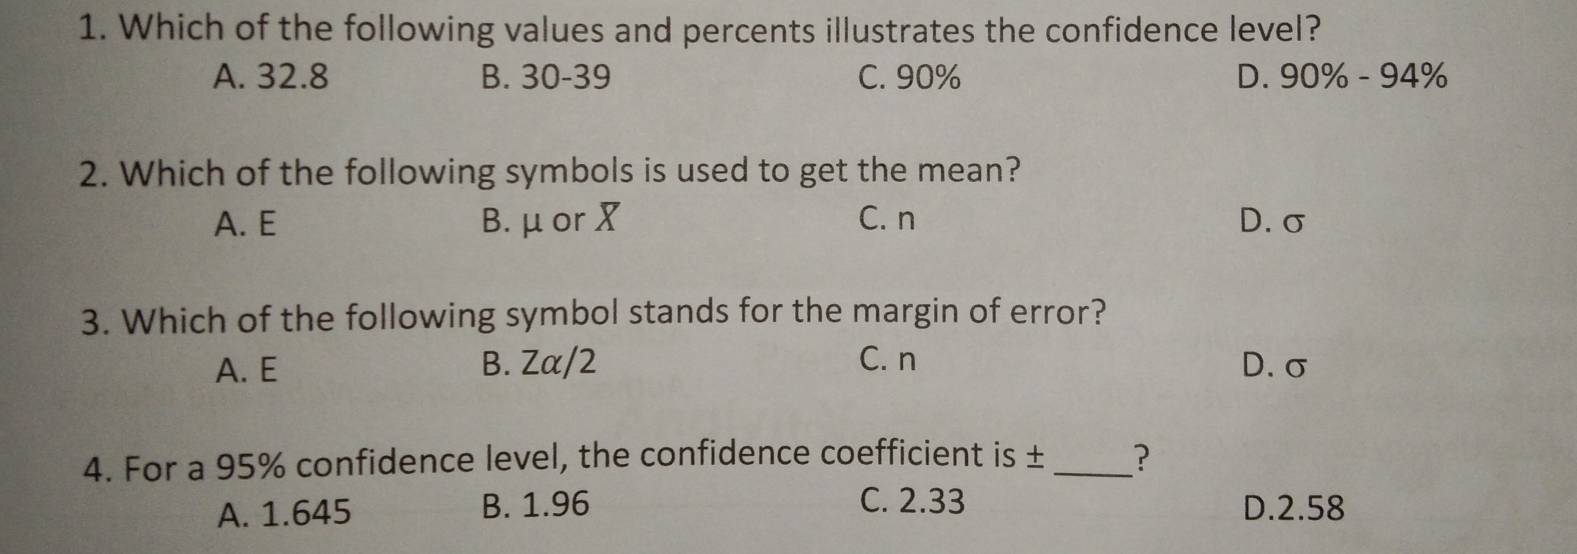 1. Which of the following values and percents illustrates the confidence level? A. 32.8 B. 30-39 C. 90% D. 90% -94% 2. Which of the following symbols is used to get the mean? A.E B.μor X C.n D.σ 3. Which of the following symbol stands for the margin of error? A. E B. Zα/2 C. n D.σ 4. For a 95% confidence level, the confidence coefficient is ± ？ A. 1.645 B. 1.96 C. 2.33 D.2.58